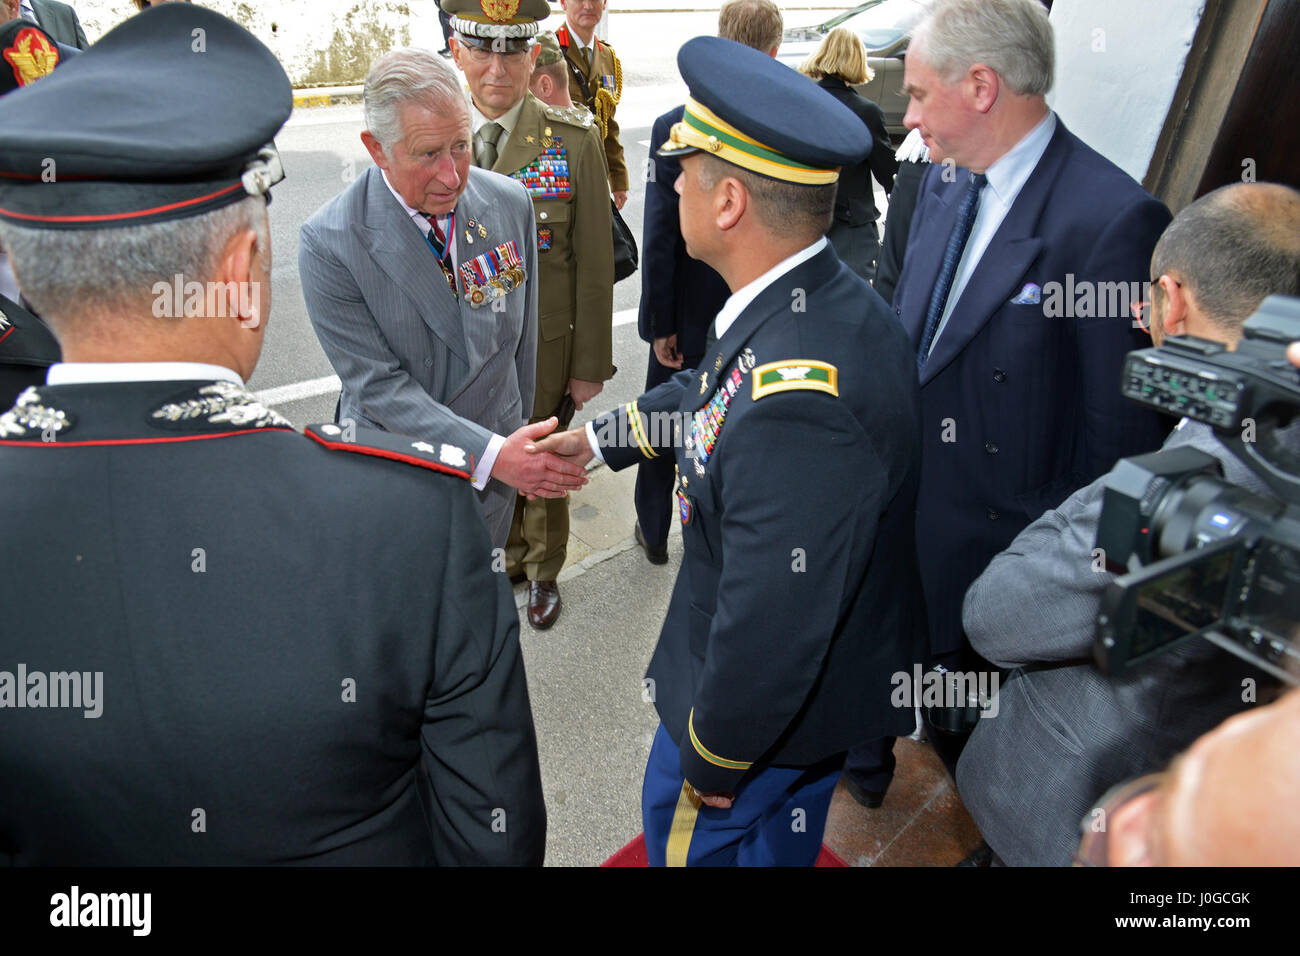 The Royal Highness, Prince Charles, Prince of Wales, thanks U.S. Army Col. Darius S. Gallegos, CoESPU deputy director, during visit at Center of Excellence for Stability Police Units (CoESPU) Vicenza, Italy, April 1, 2017. (U.S. Army Photo by Visual Information Specialist Antonio Bedin/released) Stock Photo